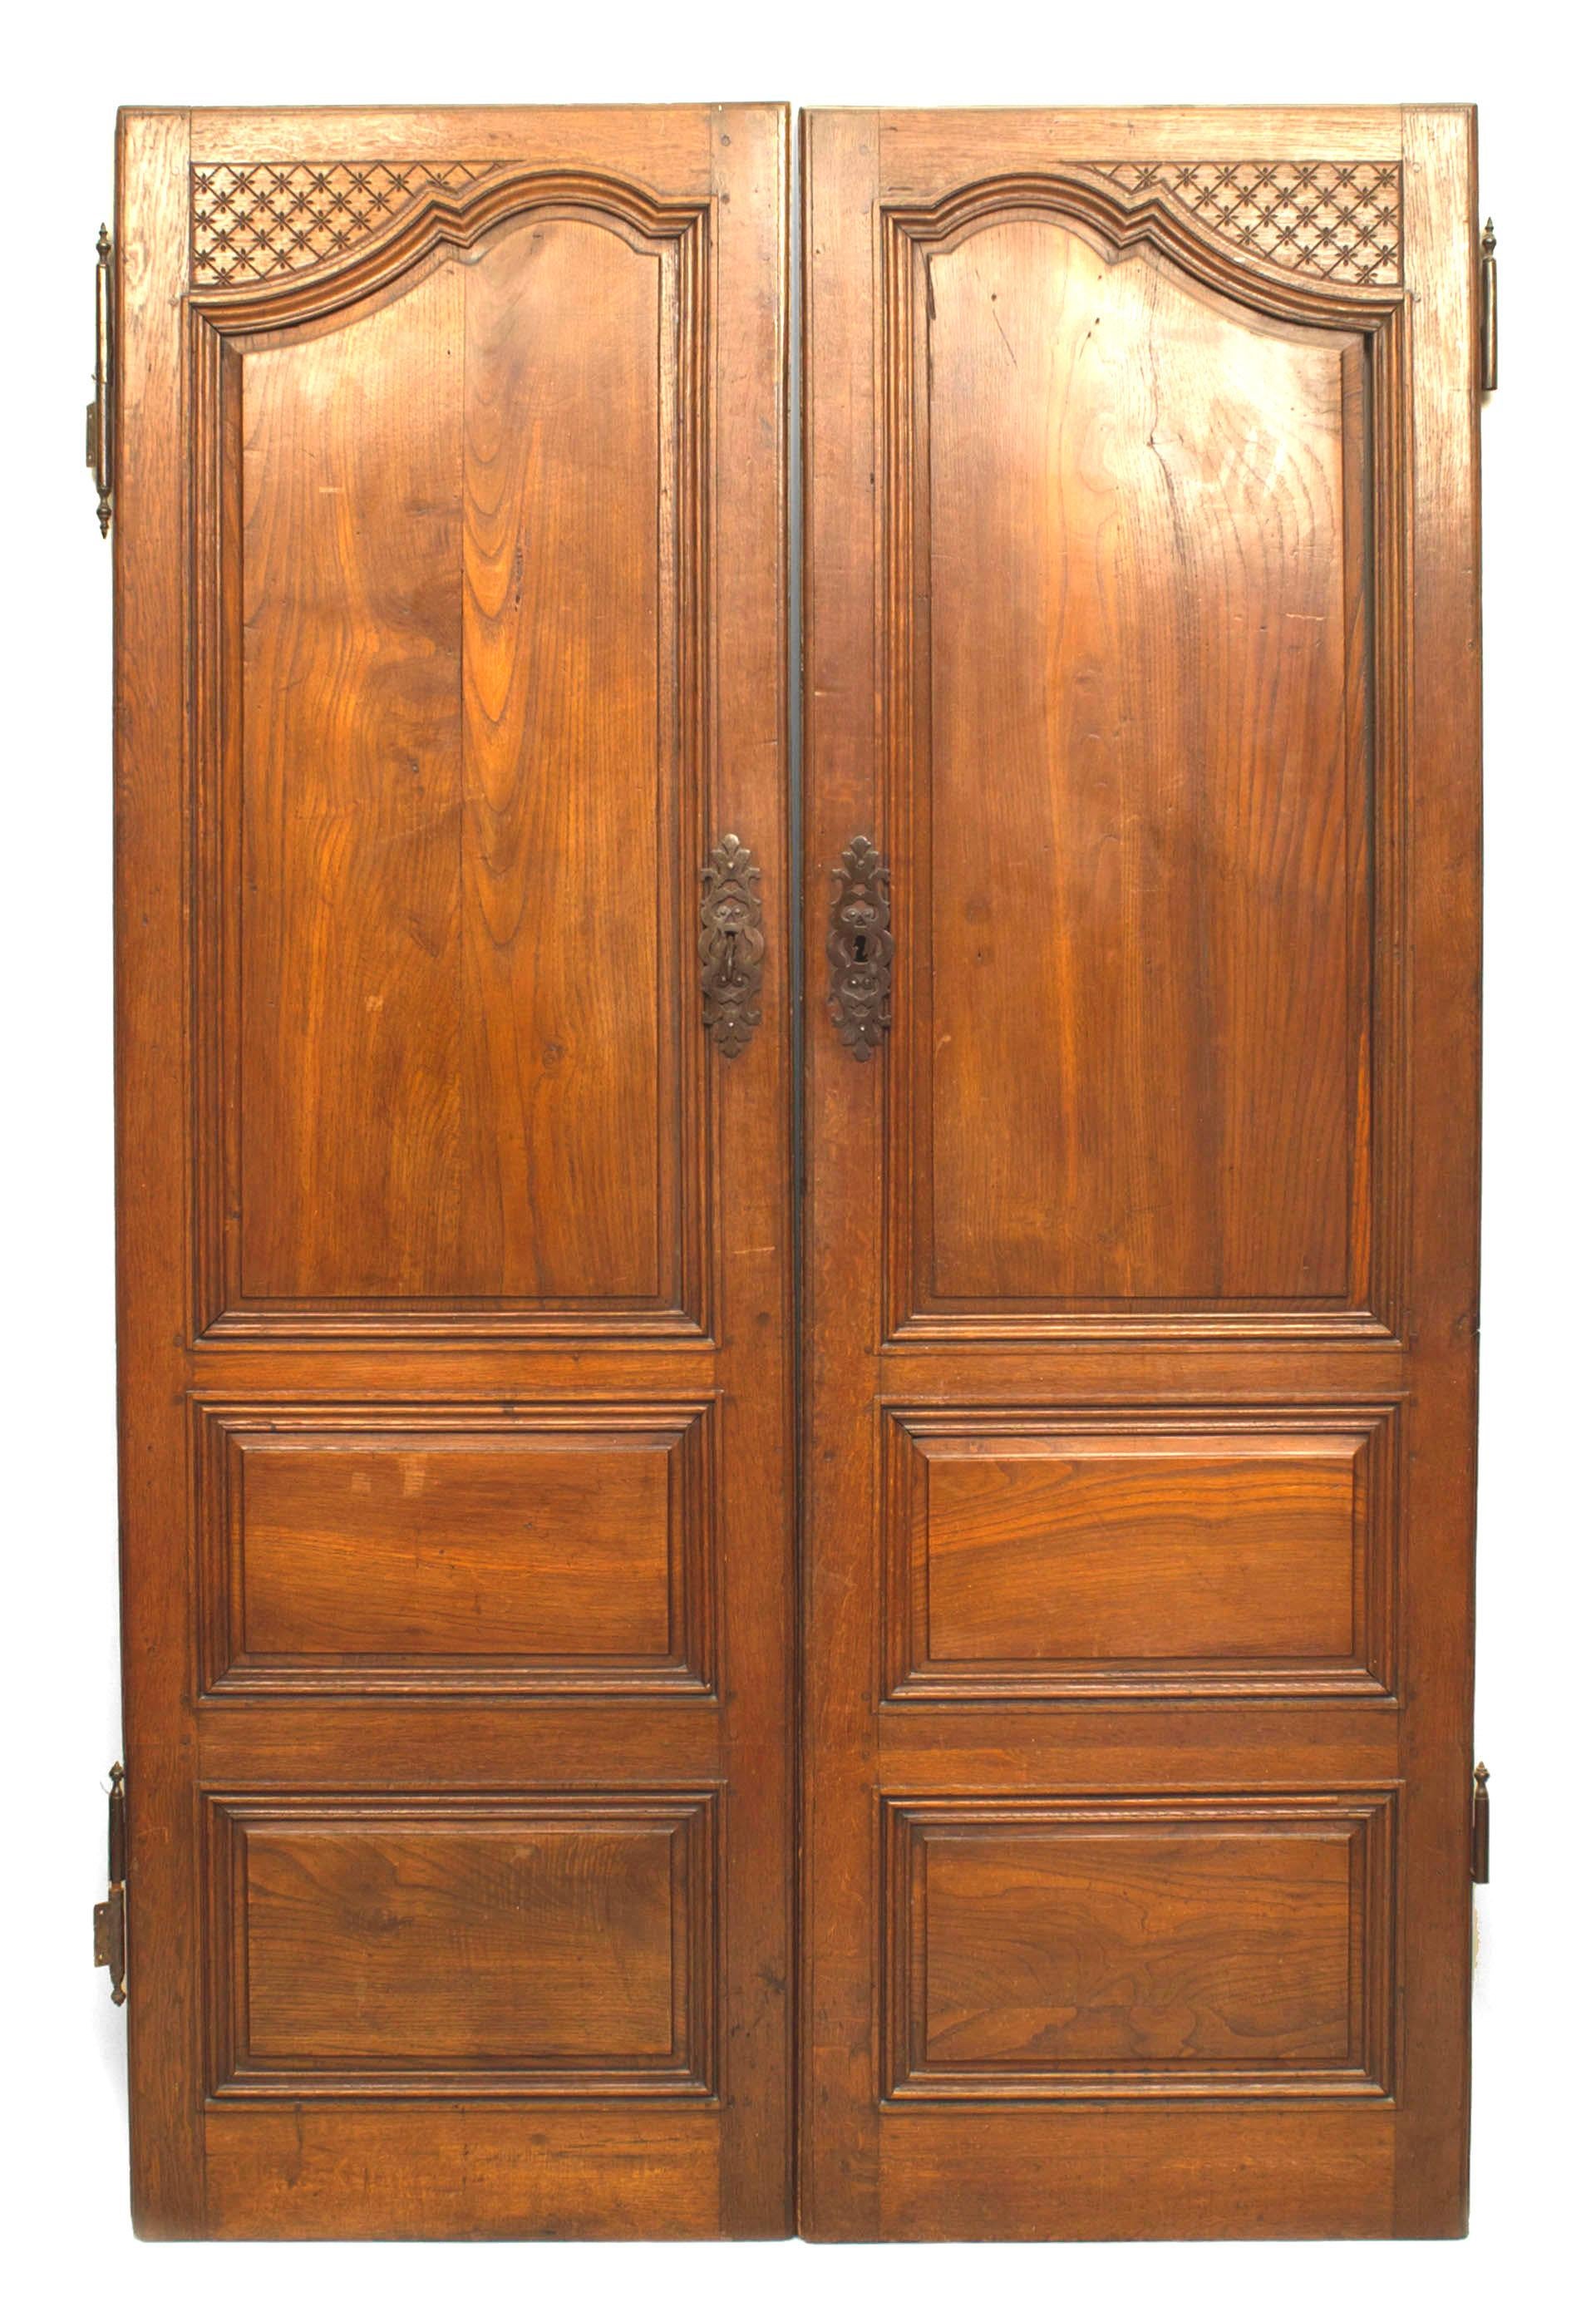 Pair of French Provincial (18th Century) walnut doors with 2 small rectangular panels under a large one with carving in corner and wrought iron hardware, finished back. (PRICED AS Pair).
